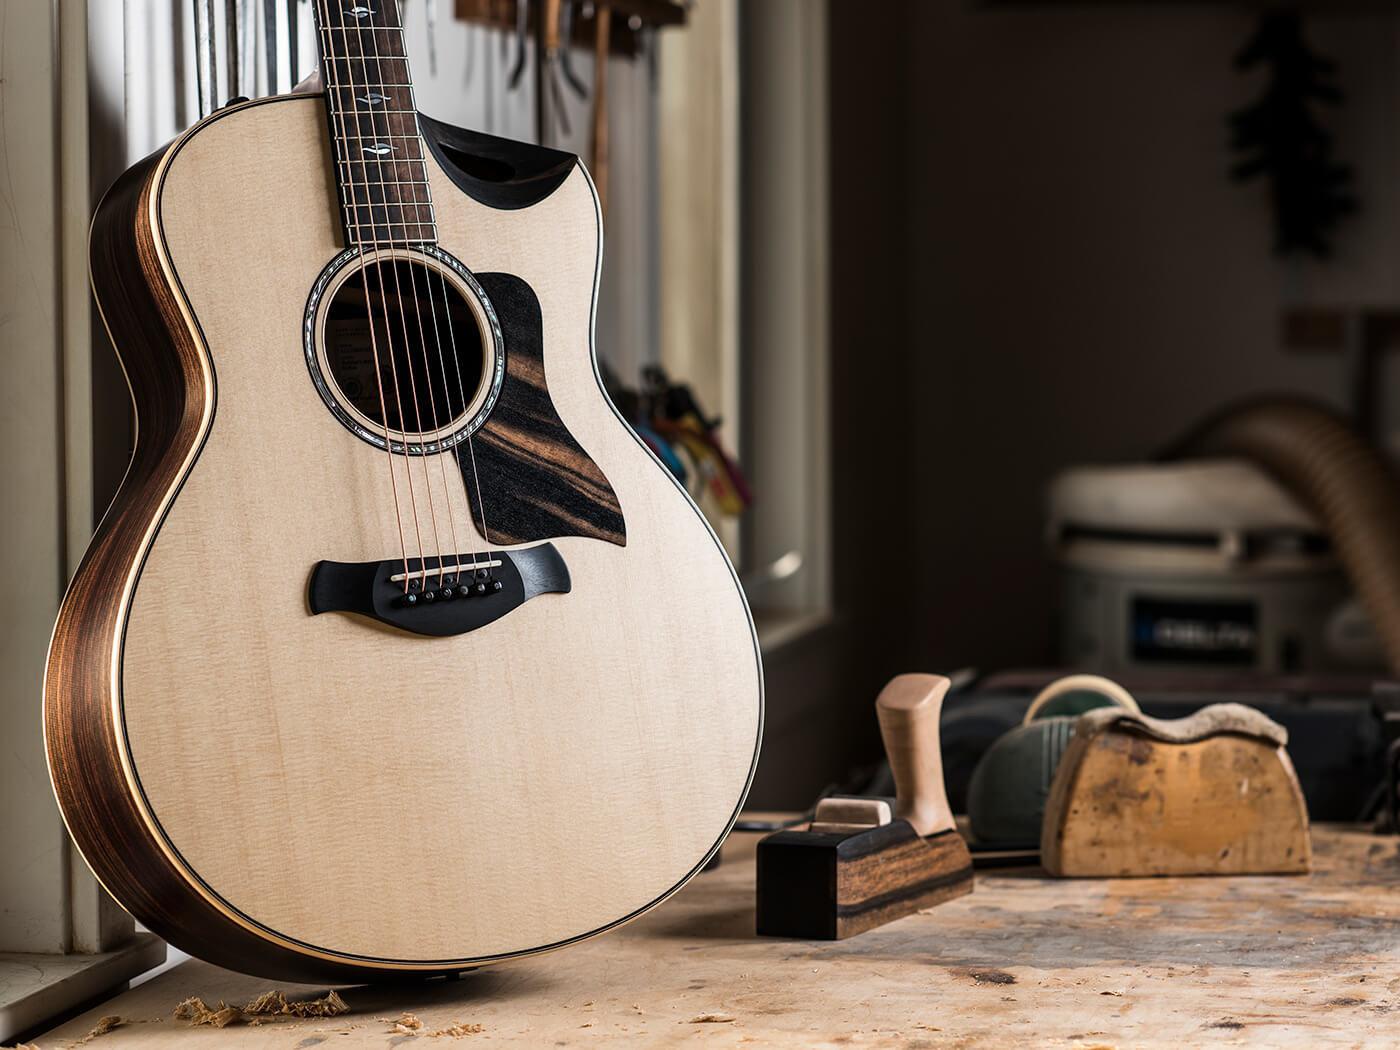 Review: Taylor Guitars Builder's Edition 816ce and 324ce